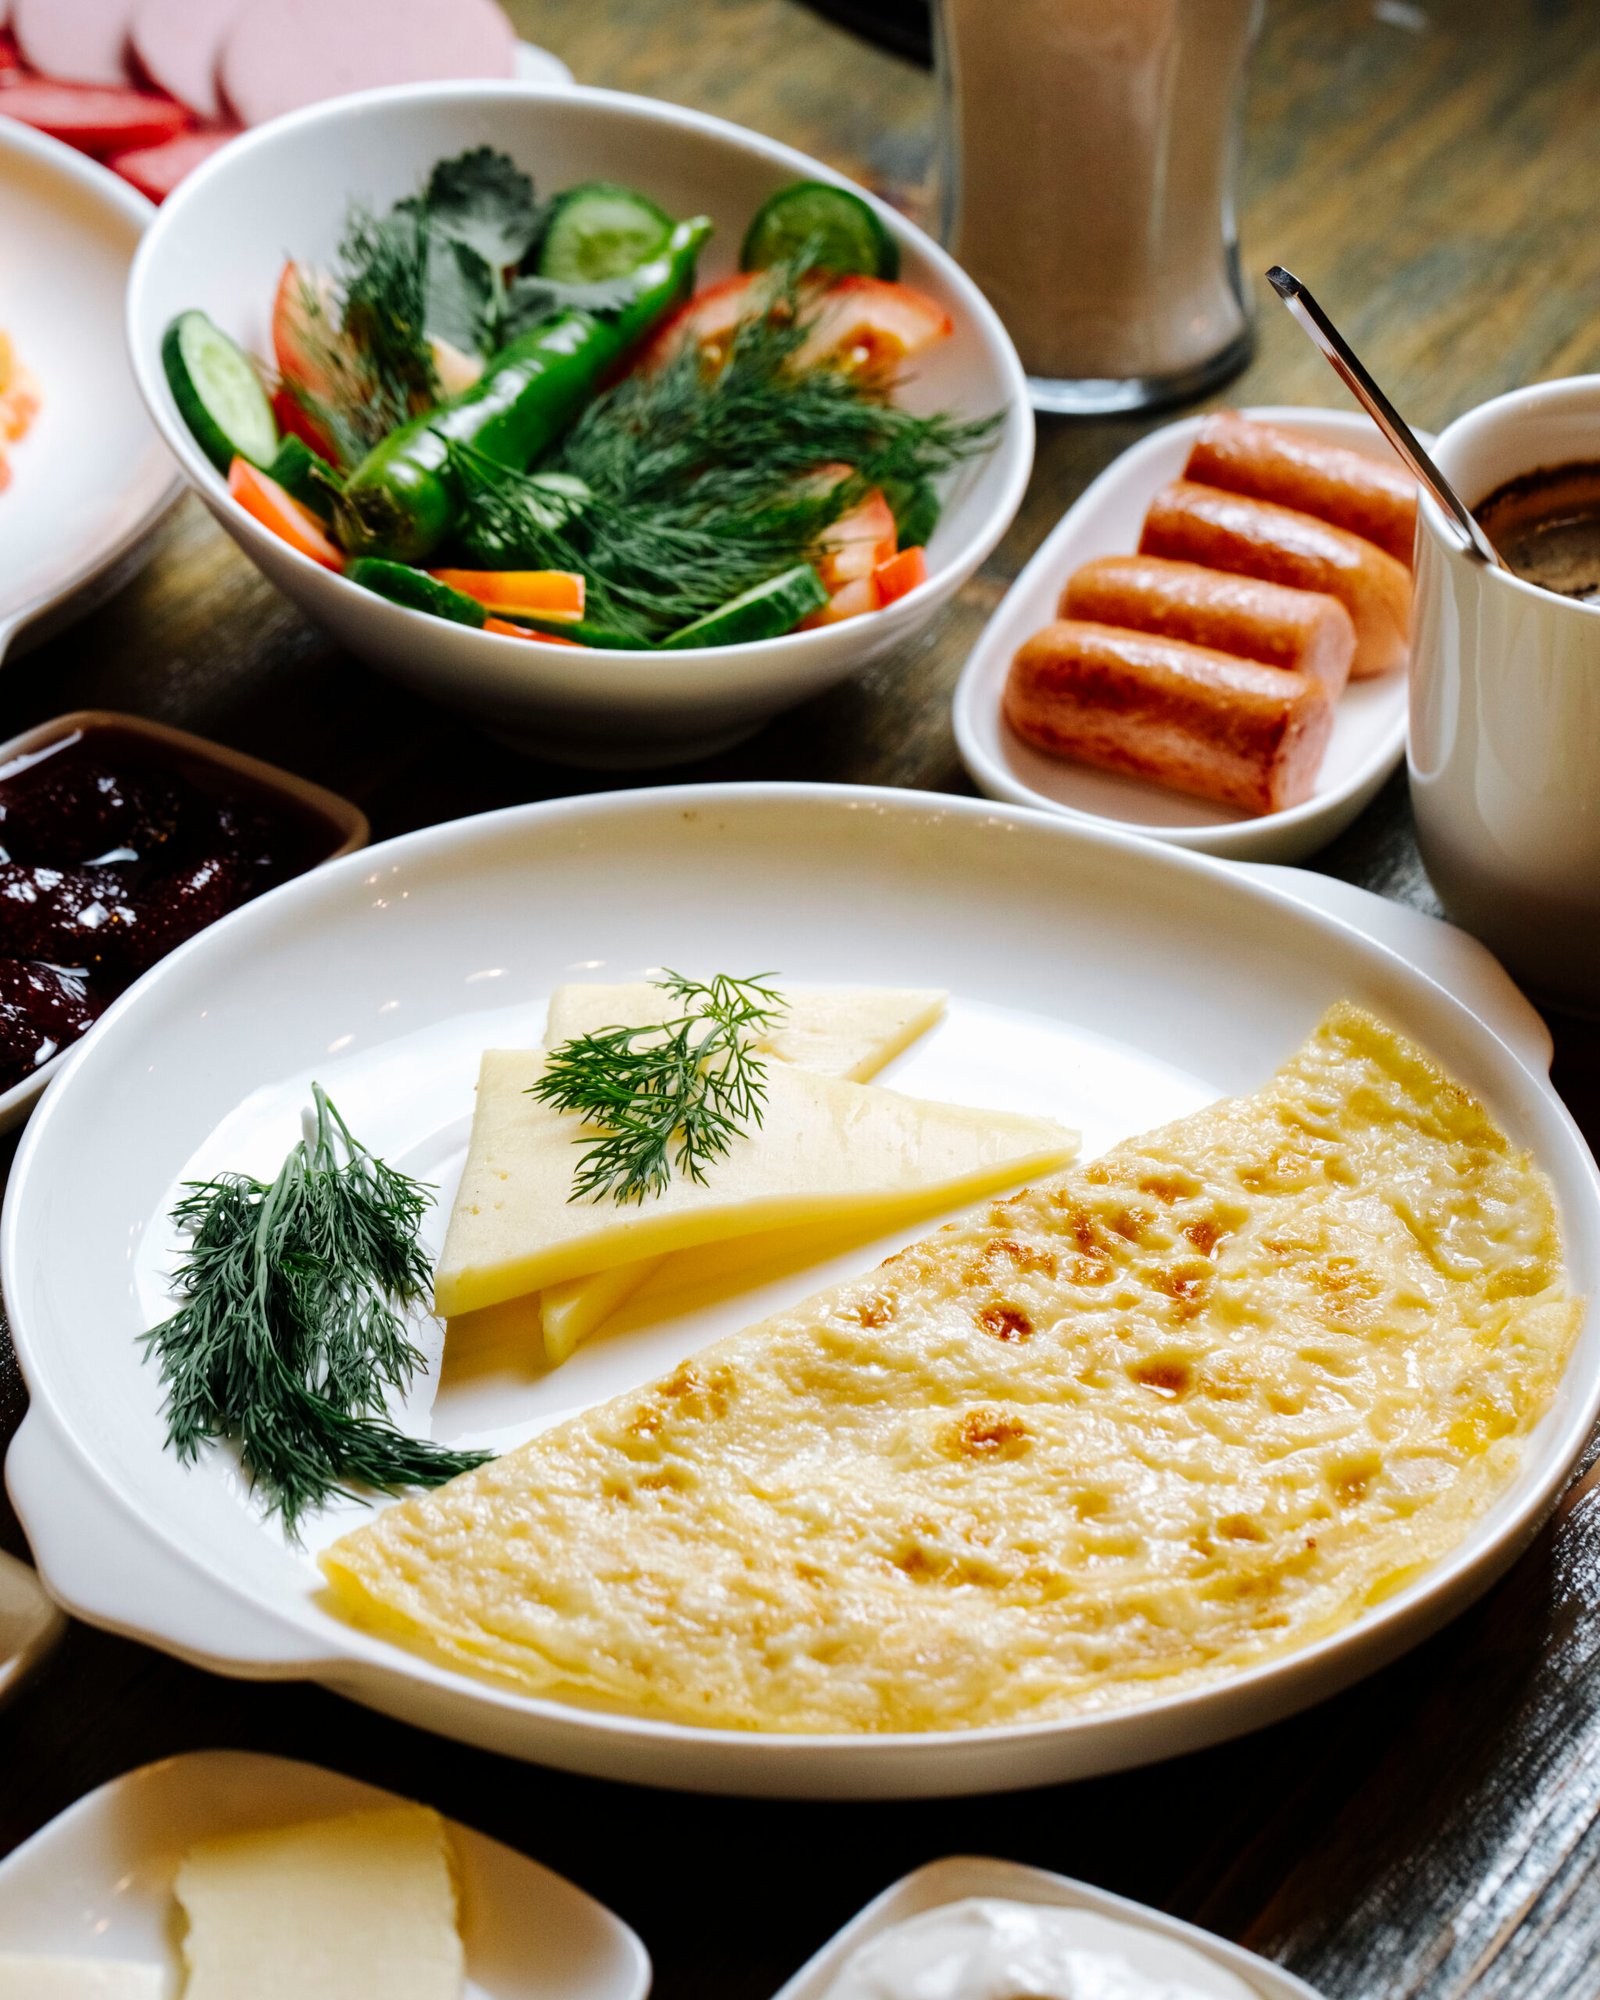 Classic Cheese Omelet